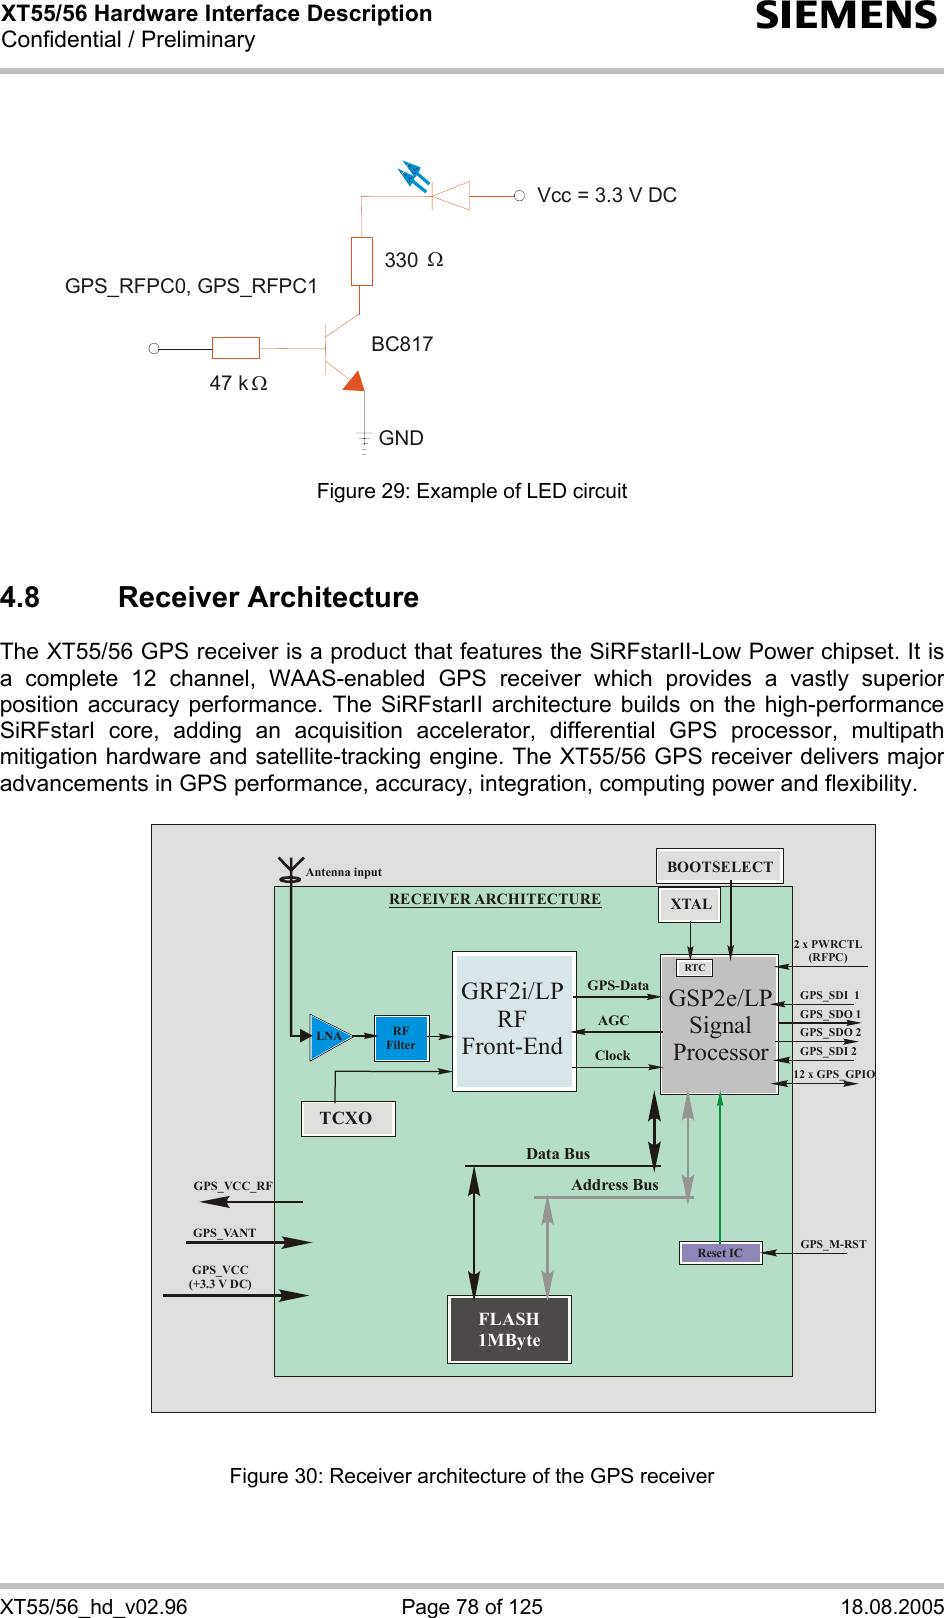 XT55/56 Hardware Interface Description Confidential / Preliminary s XT55/56_hd_v02.96  Page 78 of 125  18.08.2005               Figure 29: Example of LED circuit   4.8 Receiver Architecture The XT55/56 GPS receiver is a product that features the SiRFstarII-Low Power chipset. It is a complete 12 channel, WAAS-enabled GPS receiver which provides a vastly superior position accuracy performance. The SiRFstarII architecture builds on the high-performance SiRFstarI core, adding an acquisition accelerator, differential GPS processor, multipath mitigation hardware and satellite-tracking engine. The XT55/56 GPS receiver delivers major advancements in GPS performance, accuracy, integration, computing power and flexibility.   Antenna input LNA RF FilterGRF2i/LPRFFront-EndGSP2e/LPSignalProcessorXTALData BusAddress BusGPS-DataAGCClockReset ICFLASH1MByteTCXOGPS_VCC (+3.3 V DC)2 x PWRCTL(RFPC)GPS_SDI  1GPS_SDO 1GPS_SDO 2GPS_SDI 212 x GPS_GPIOGPS_M-RSTBOOTSELECTGPS_VANTGPS_VCC_RFRECEIVER ARCHITECTURERTC Figure 30: Receiver architecture of the GPS receiver     GPS_RFPC0, GPS_RFPC1 330 ΩVcc = 3.3 V DCBC81747 k Ω GND